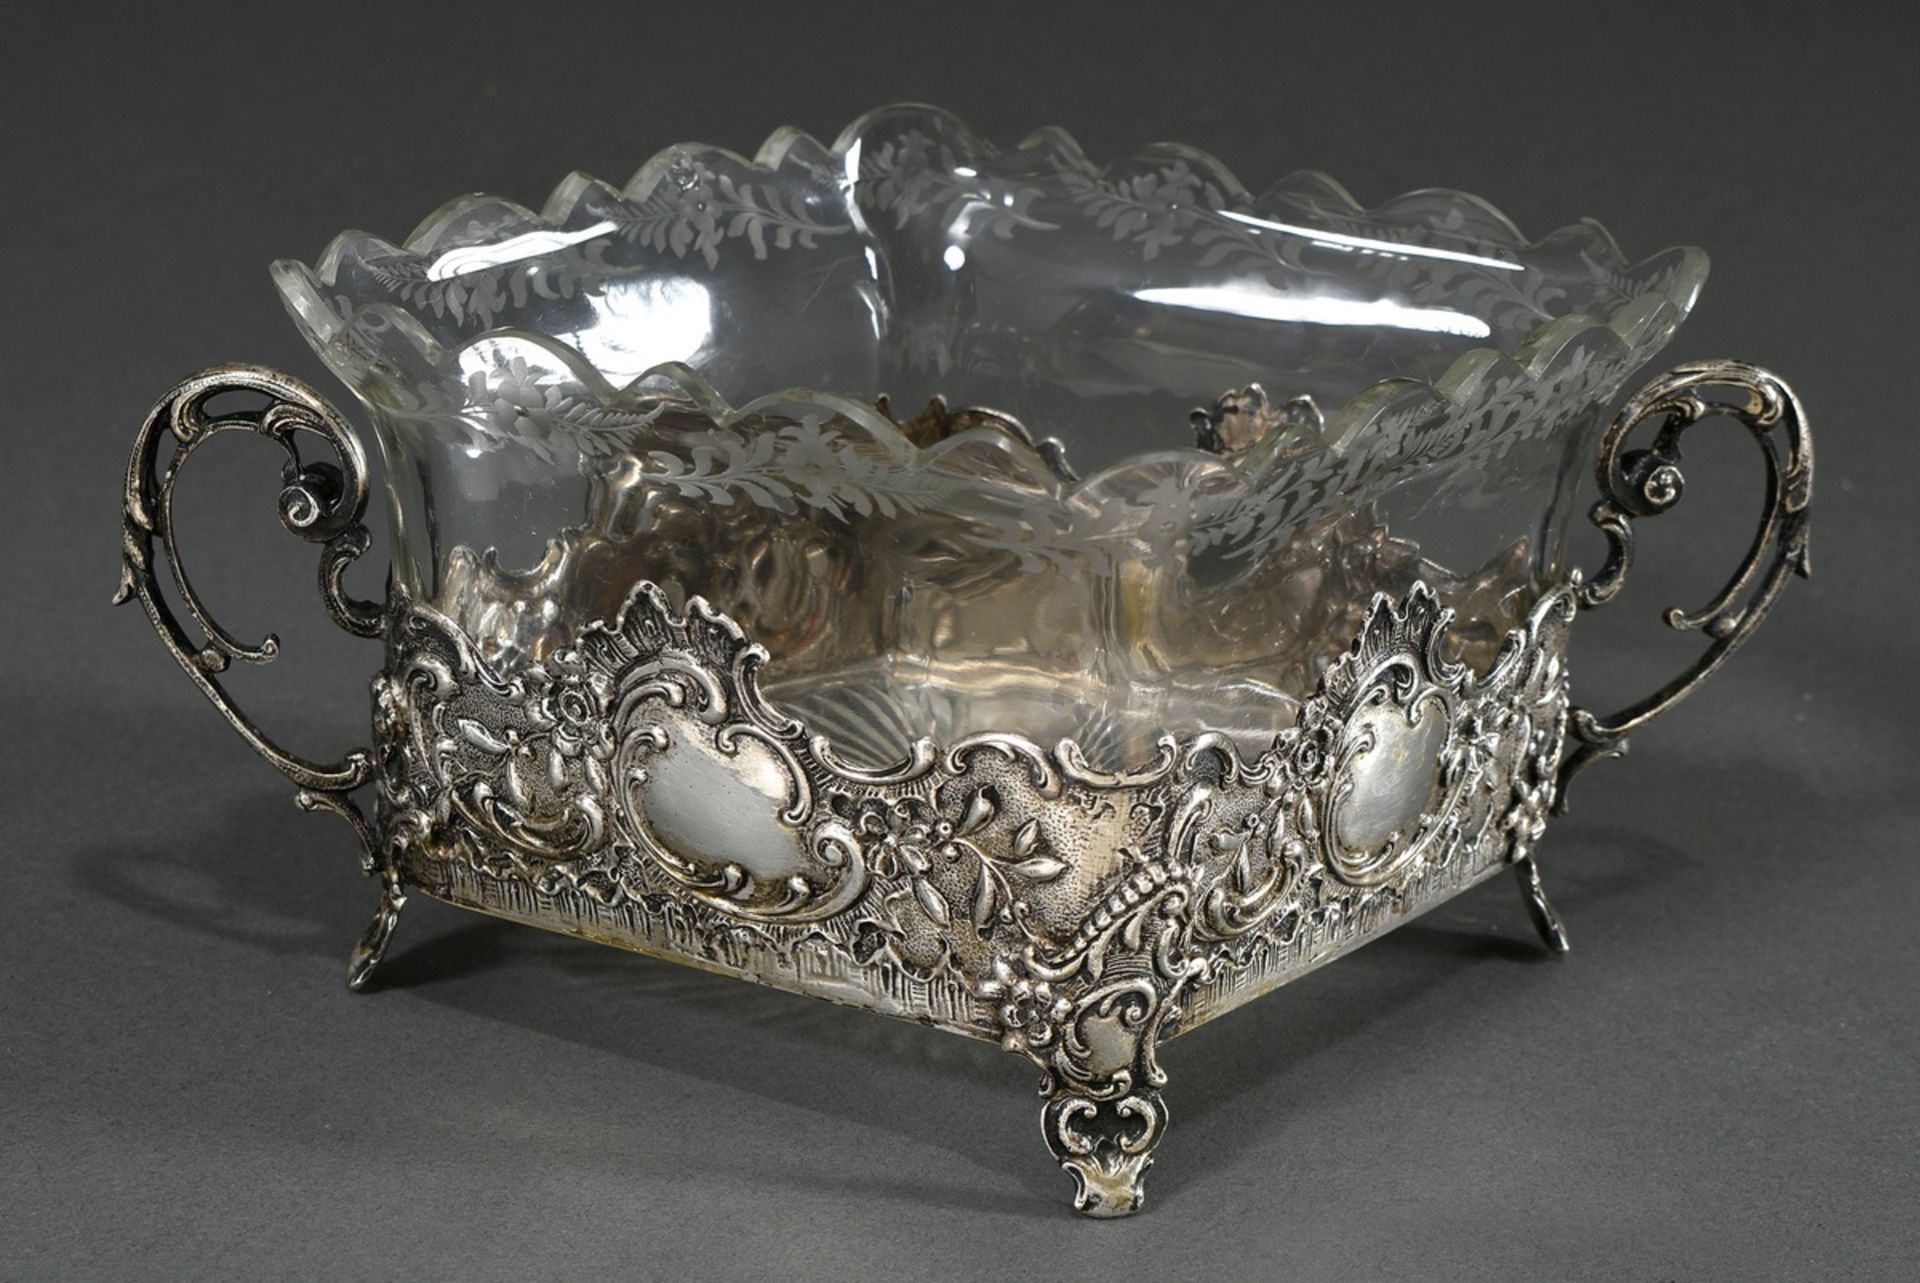 A rhombus-shaped biscuit dish in neo-rococo style on small feet with ornamental handles and floral 